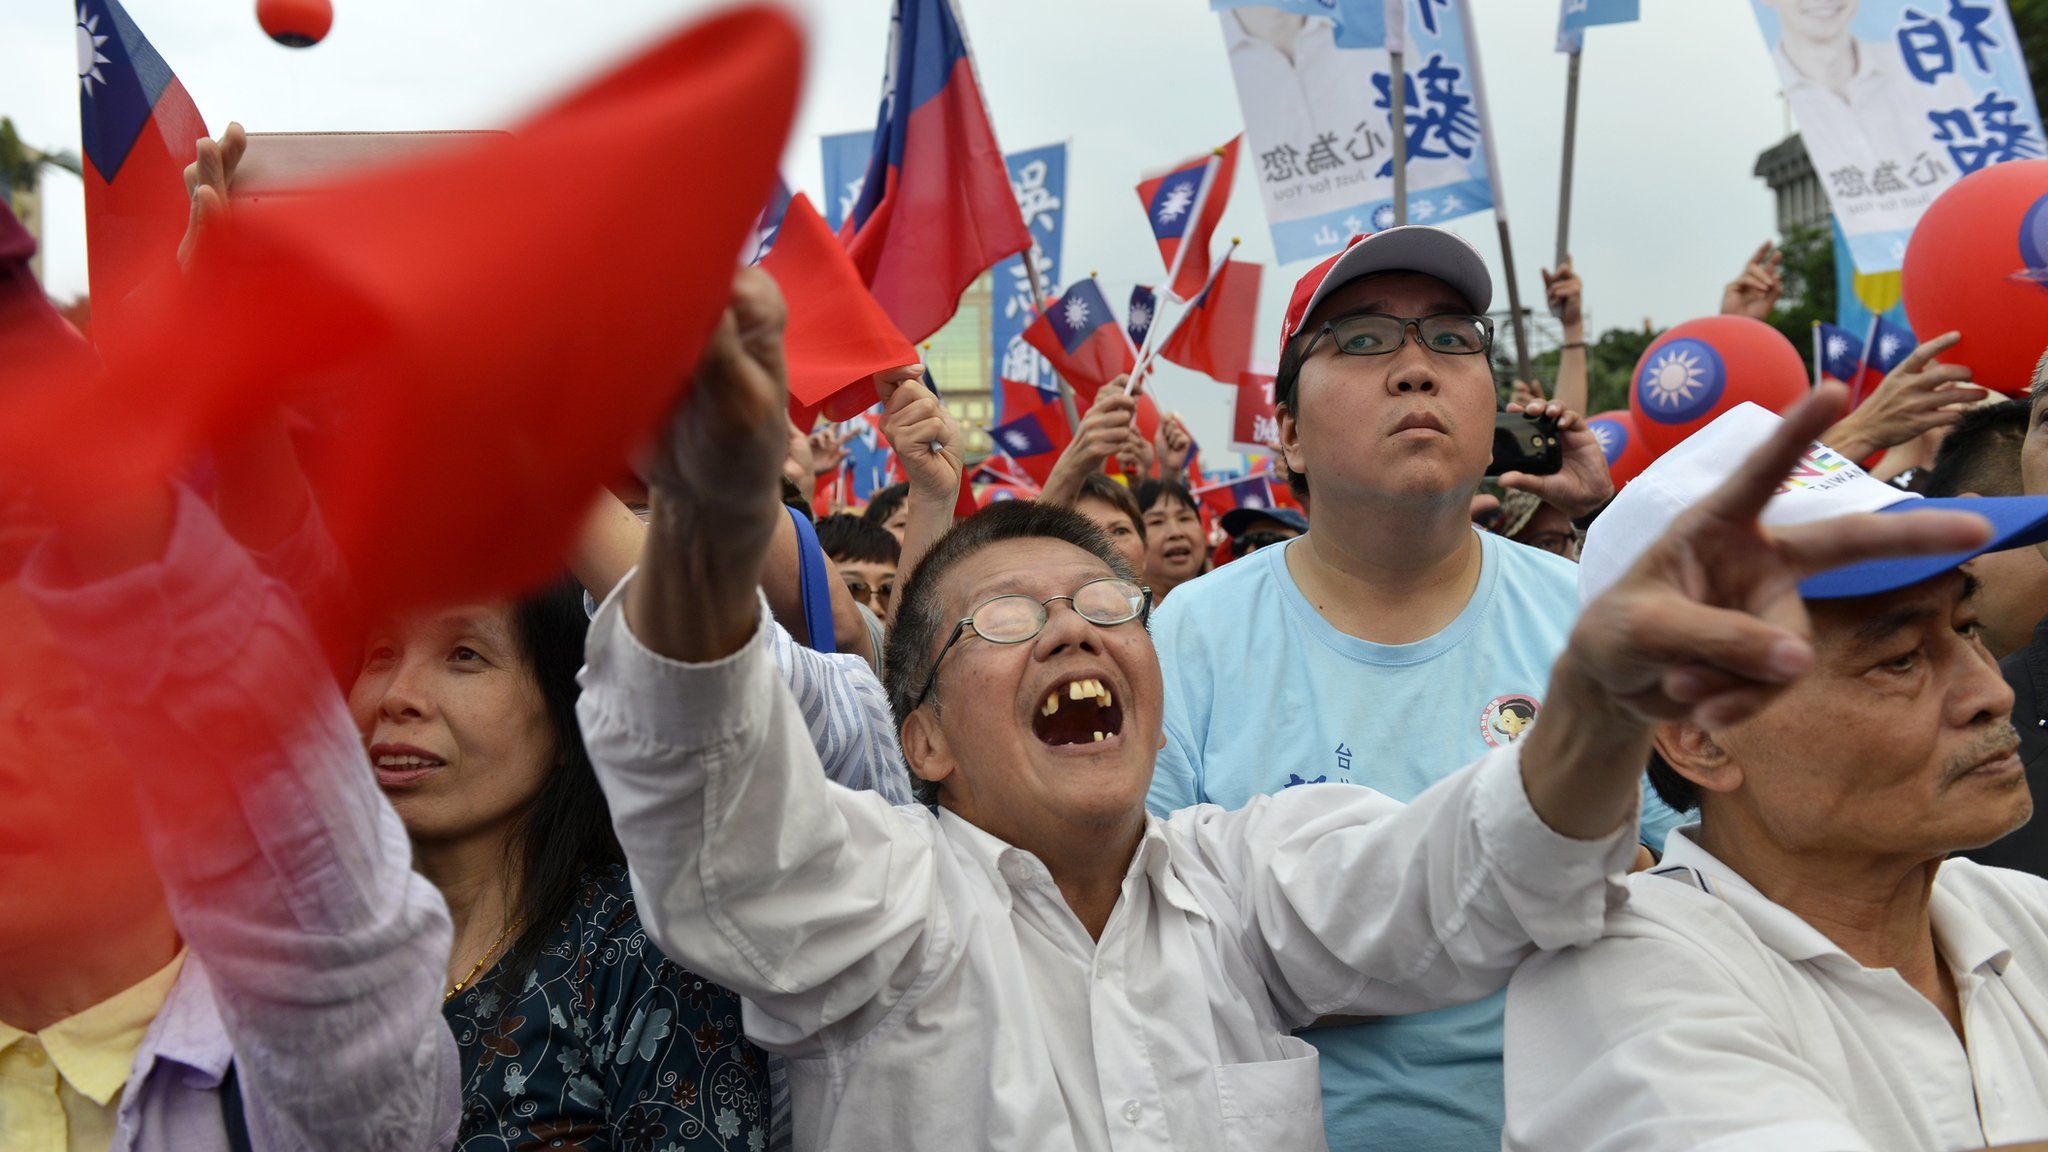 Supporters of mayoral candidate Ting Shou-chung from the opposition Kuomintang party attend a campaign rally in Taipei on November 11, 2018